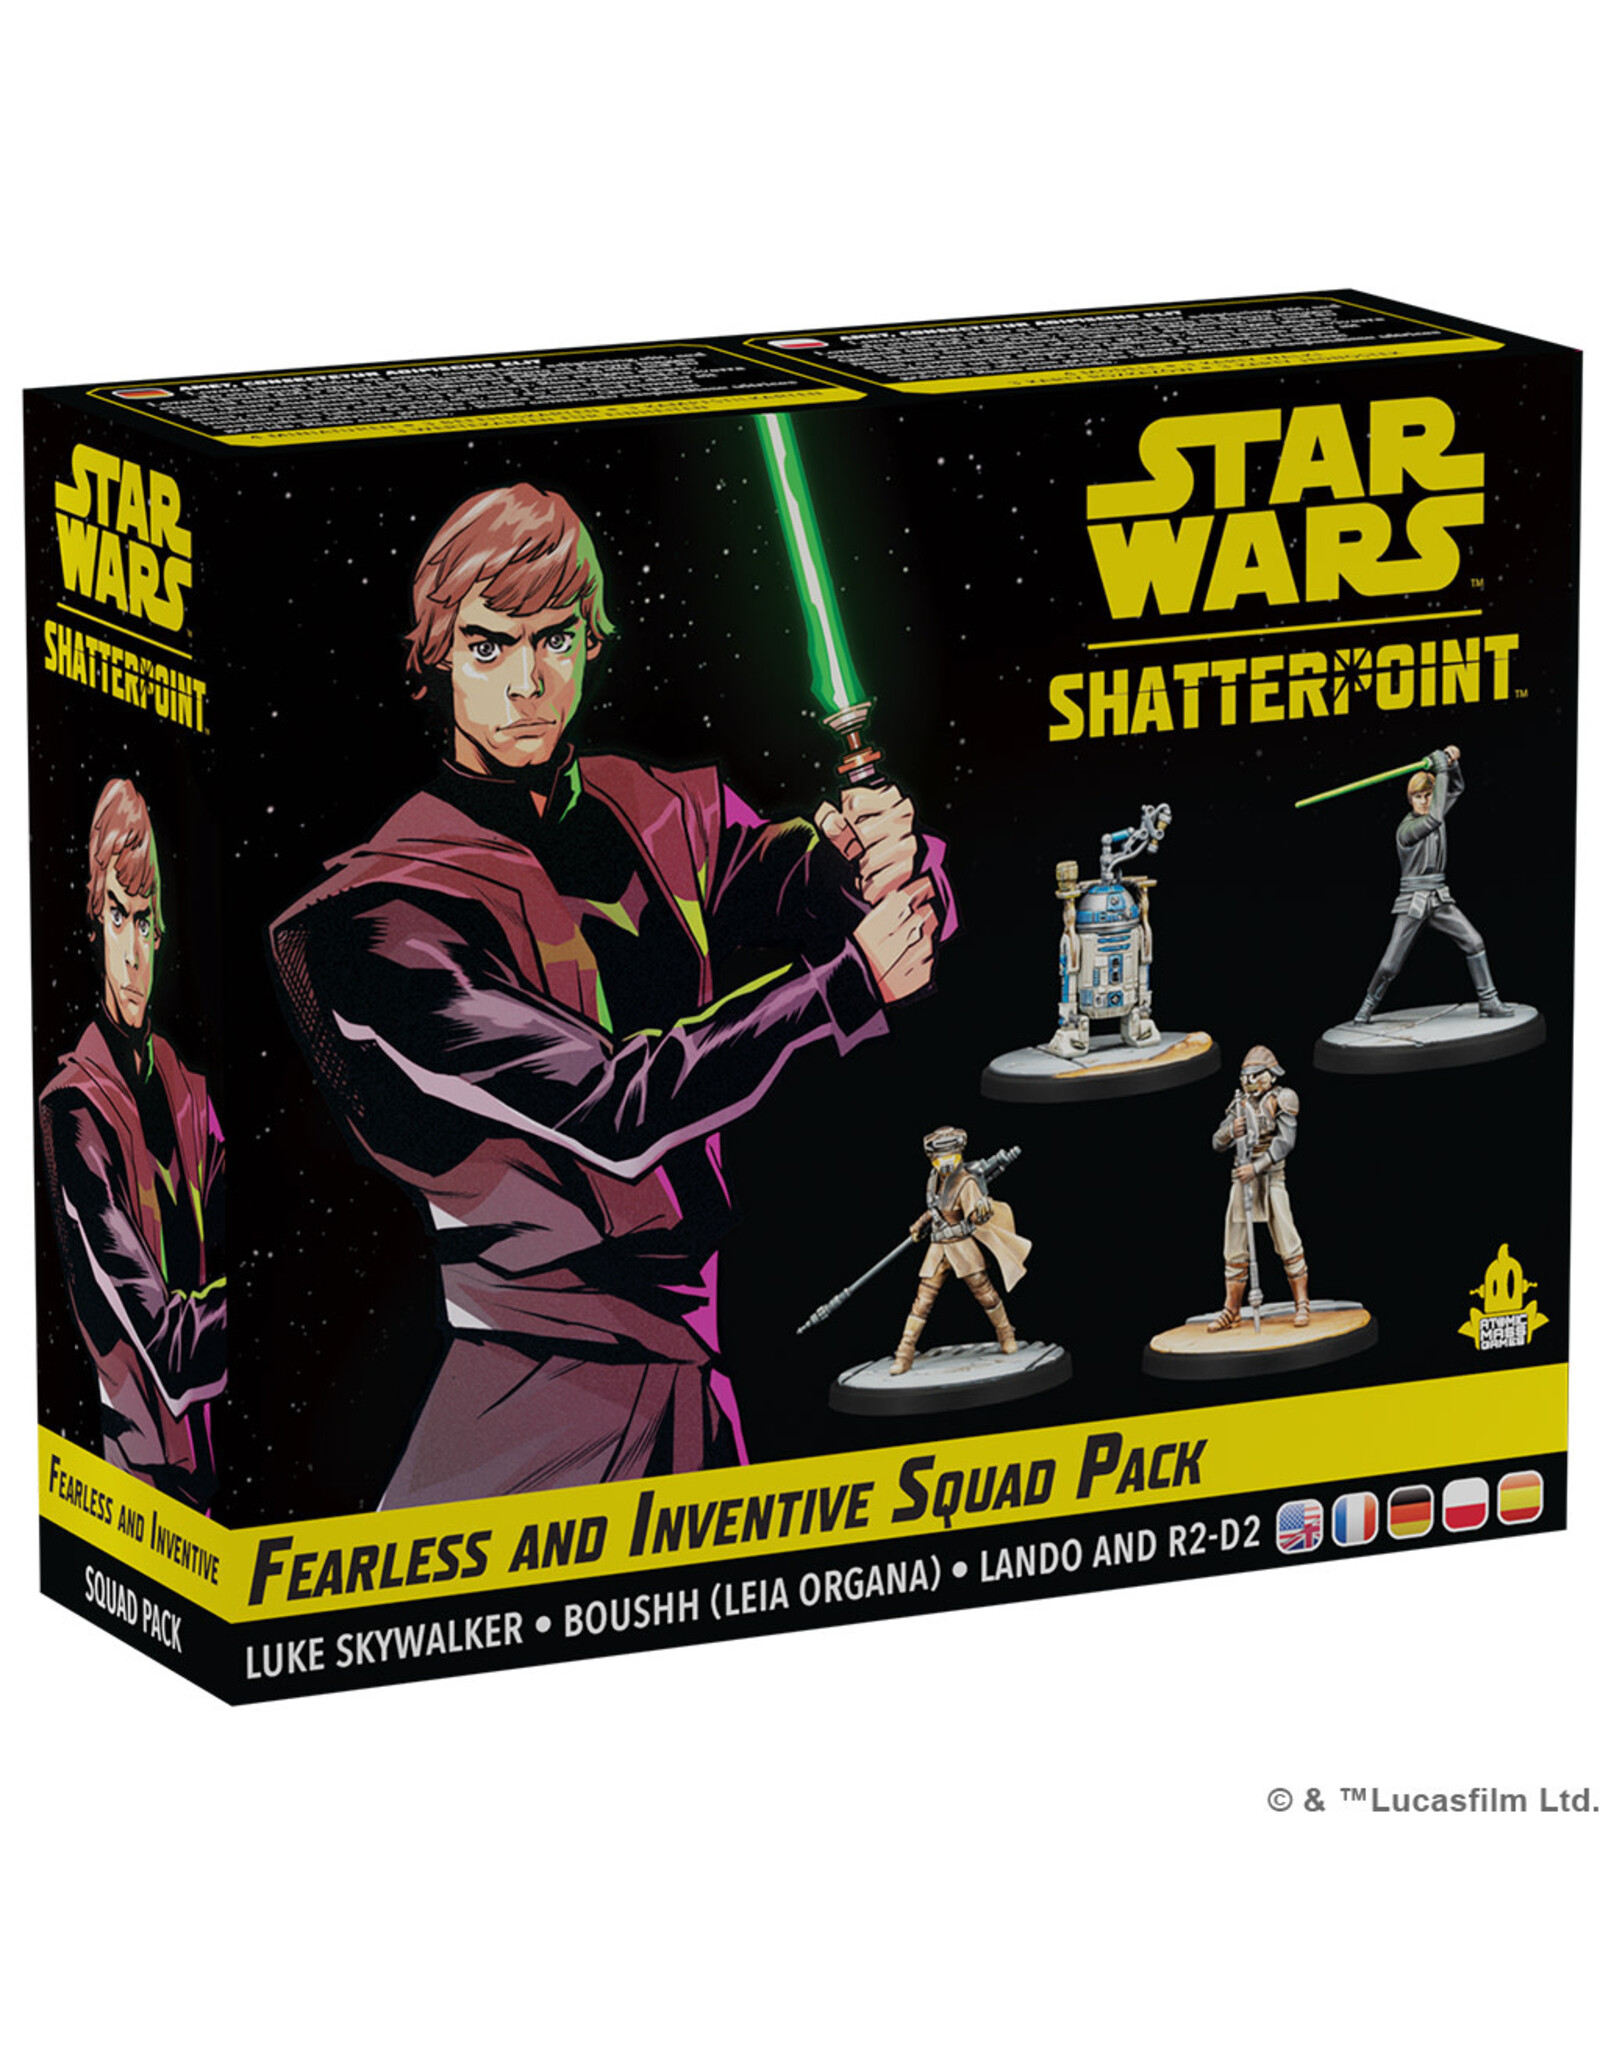 Star Wars Shatterpoint Star Wars Shatterpoint Fearless and Inventive Squad Pack